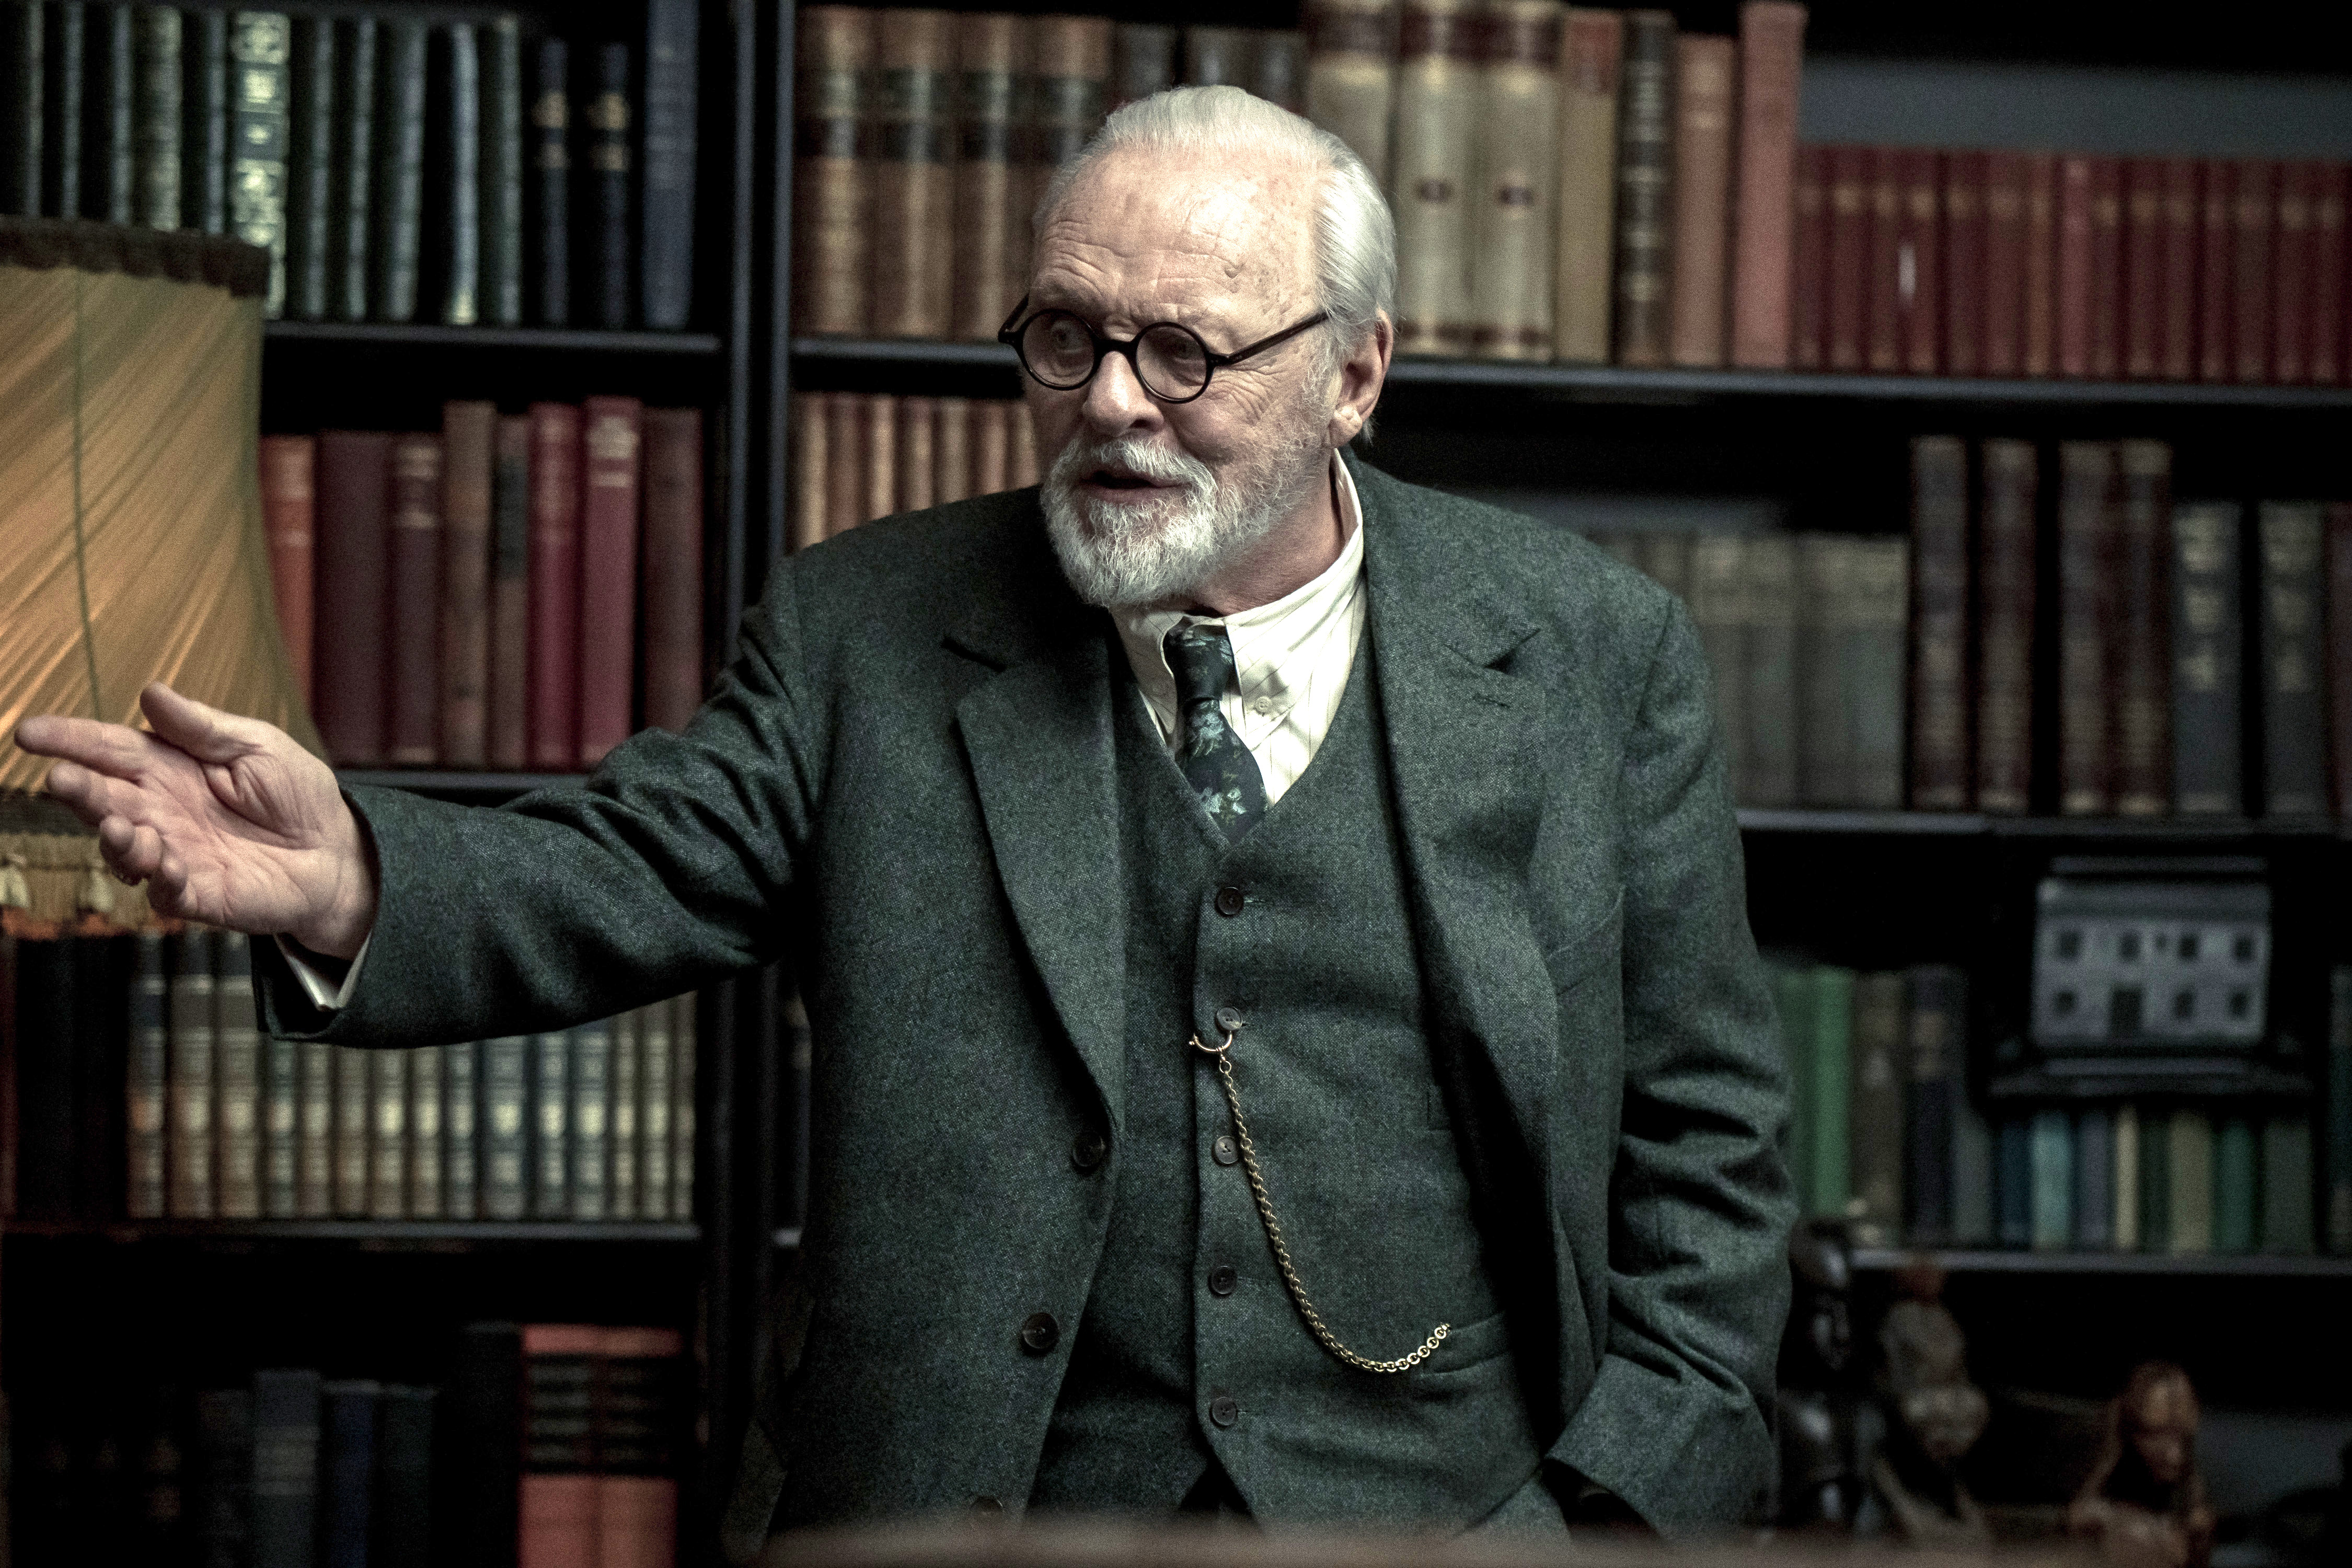 Fictional session between Sigmund Freud and CS Lewis analysed in new film